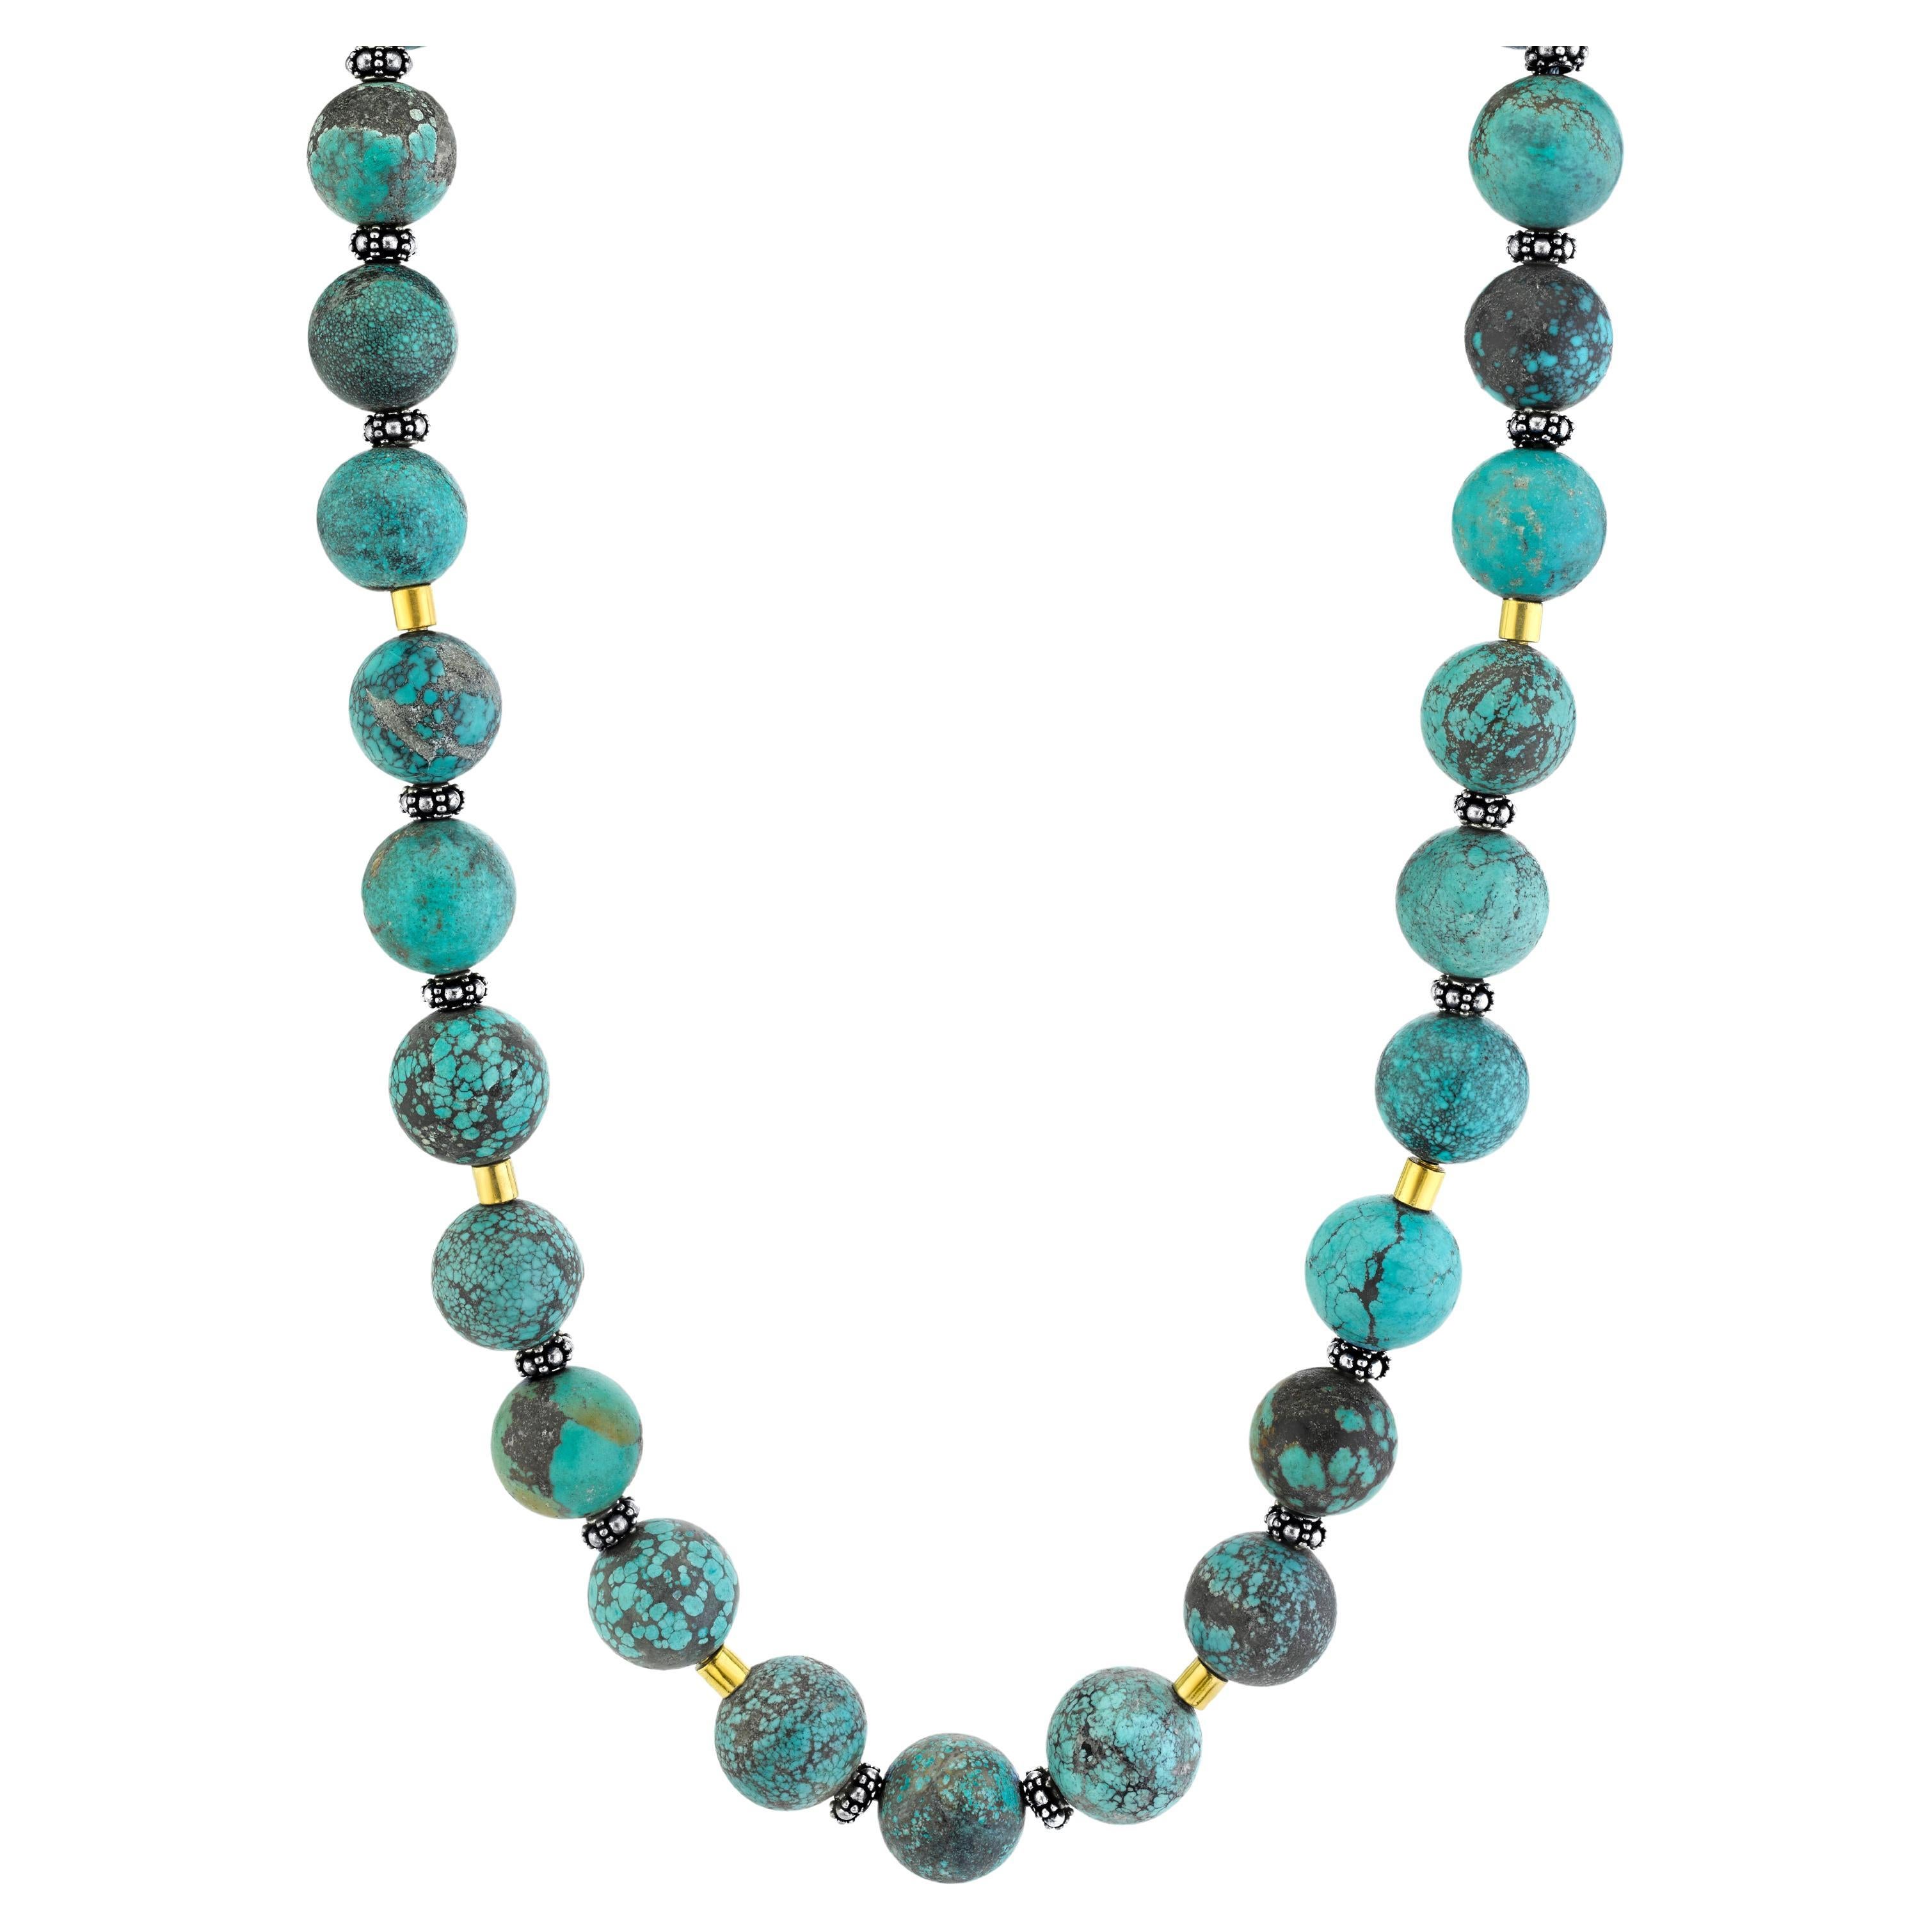 Spiderweb Turquoise Beaded Necklace with 18k Gold and Sterling Silver Accents